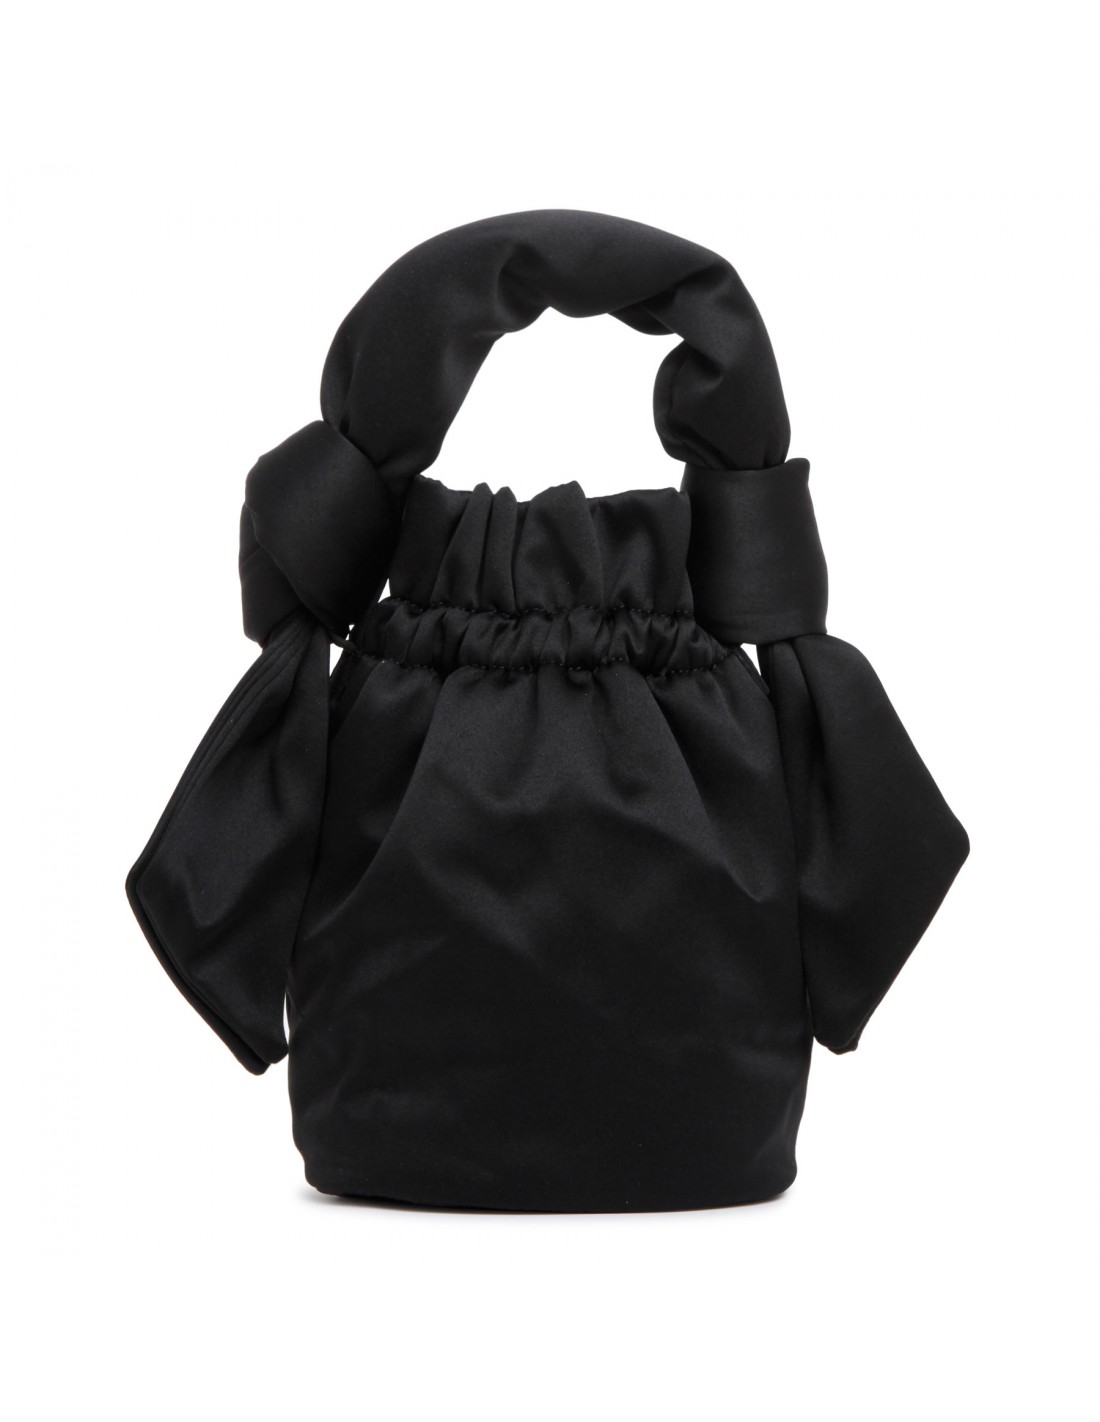 Occasion top handle knot bag